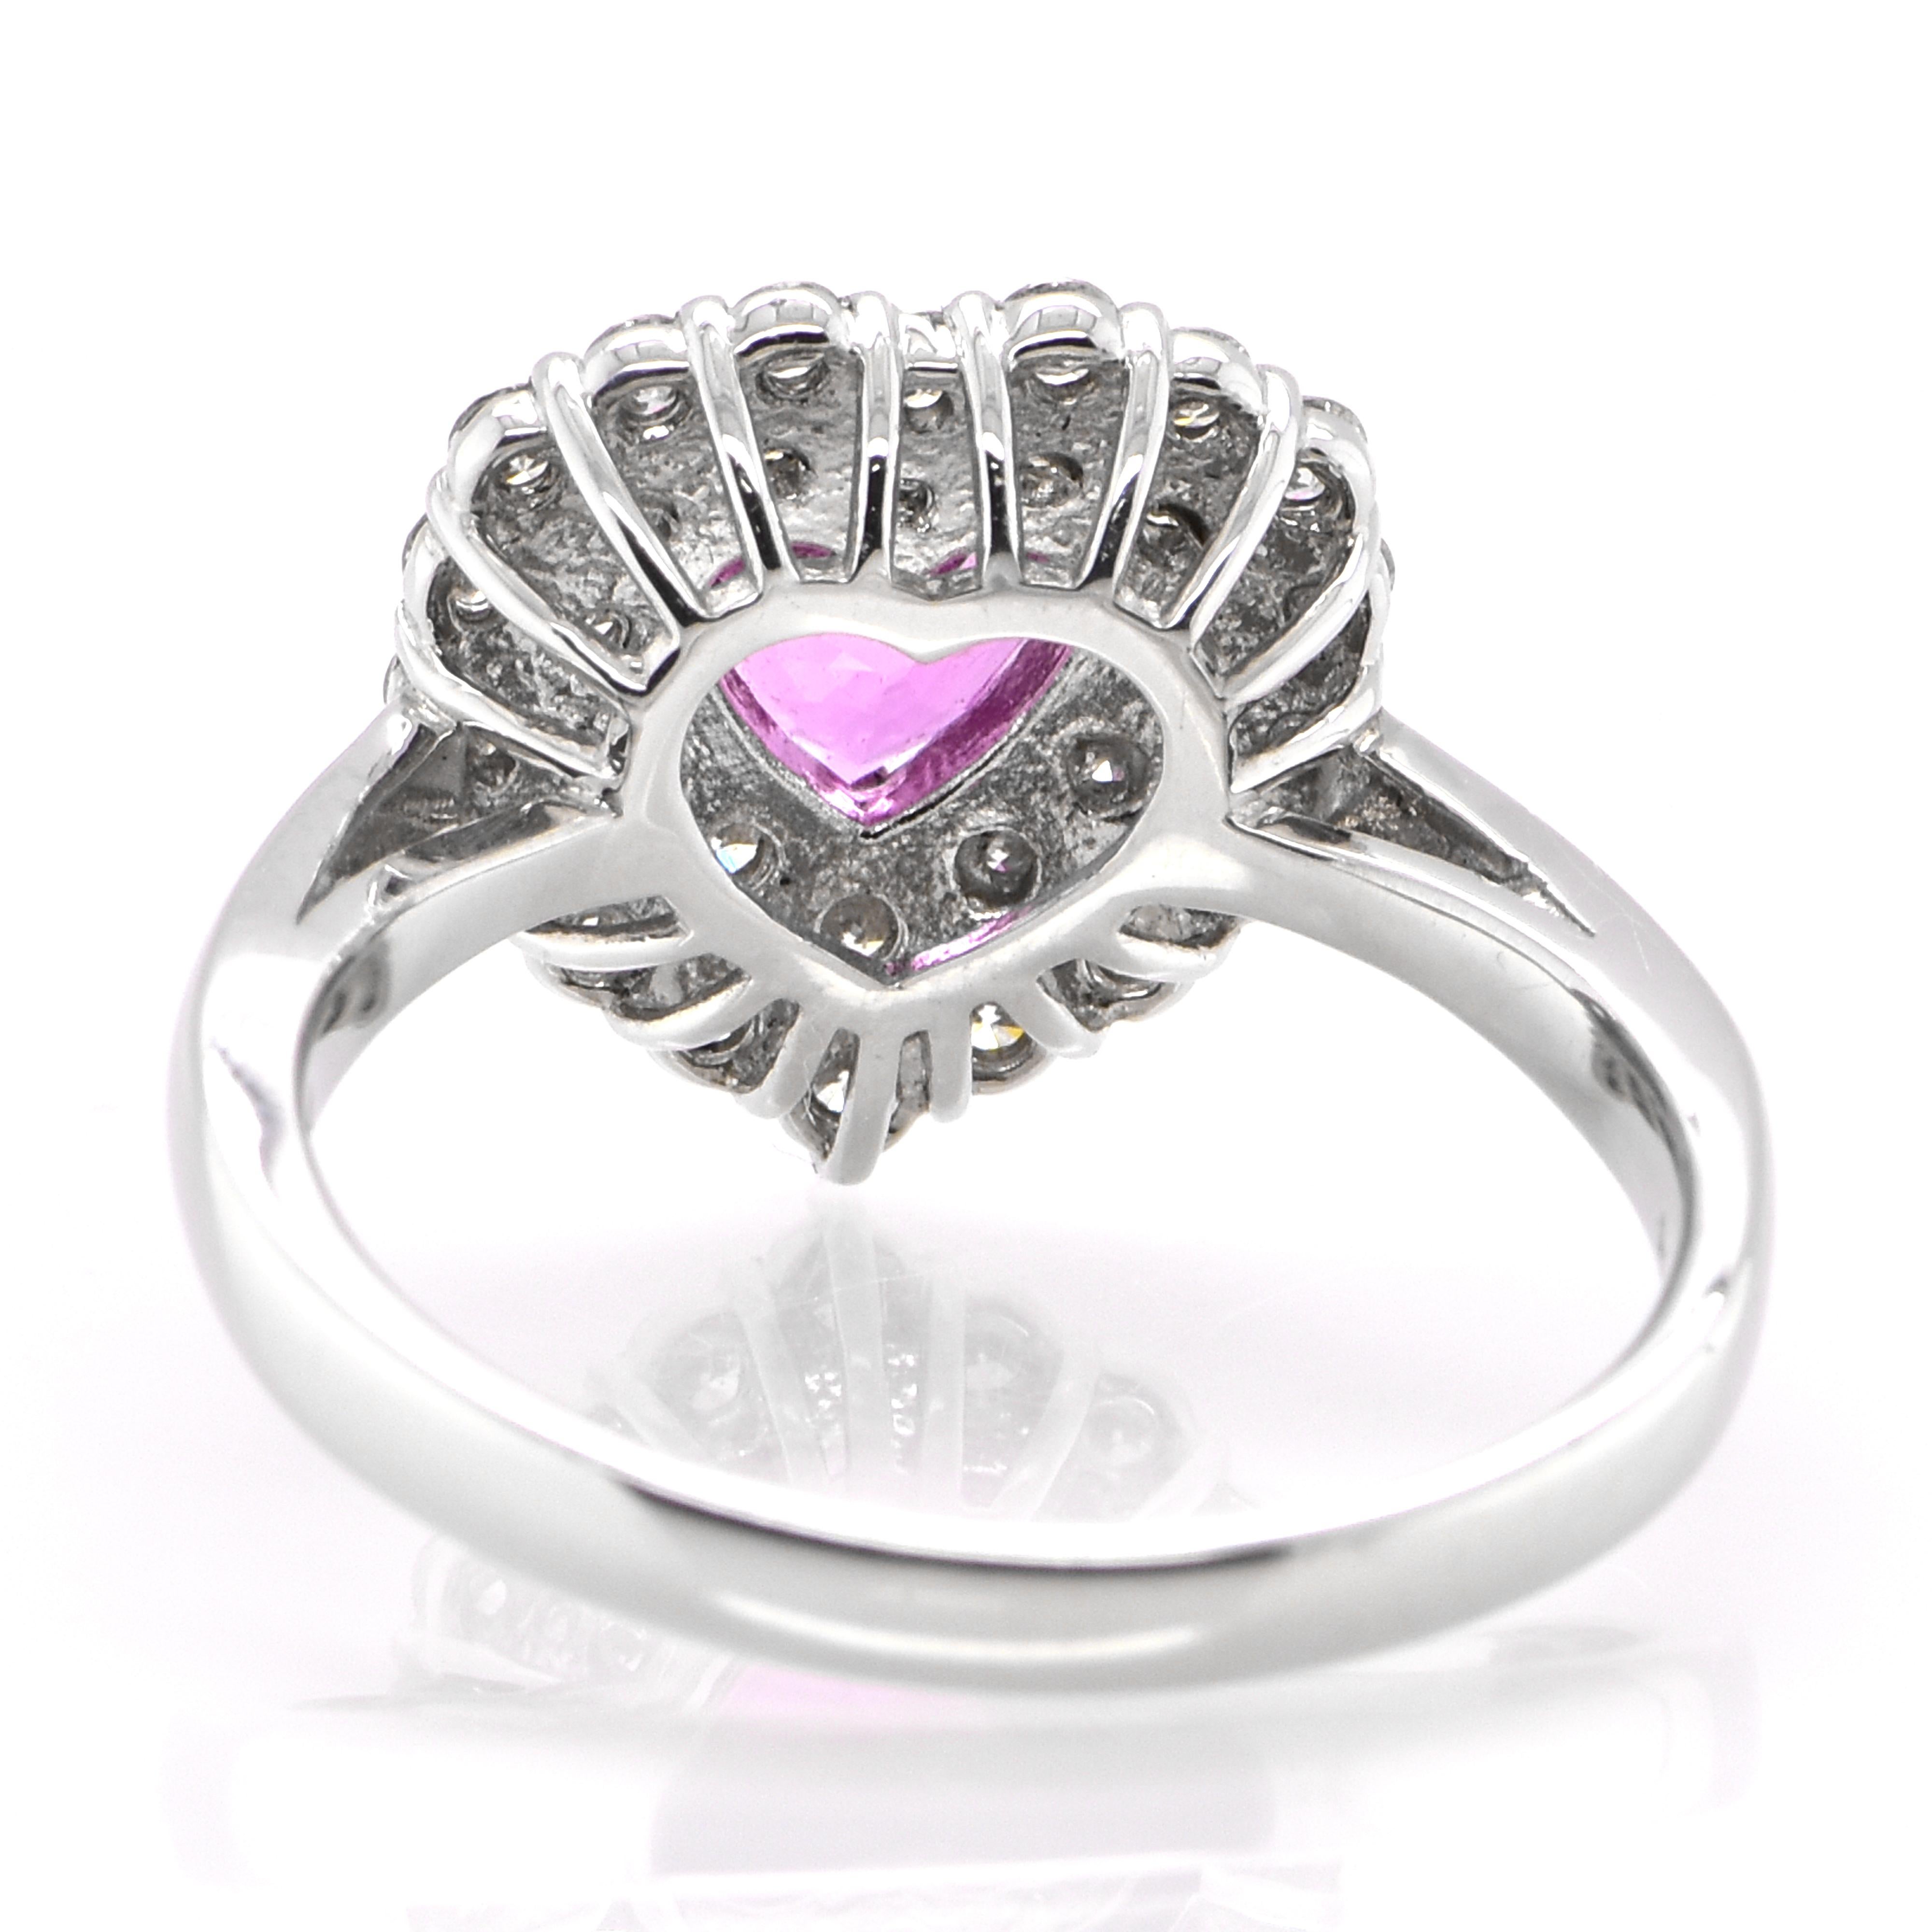 Women's 1.06 Carat Heart-Cut Pink Sapphire and Diamond Double-Halo Ring Set in Platinum For Sale